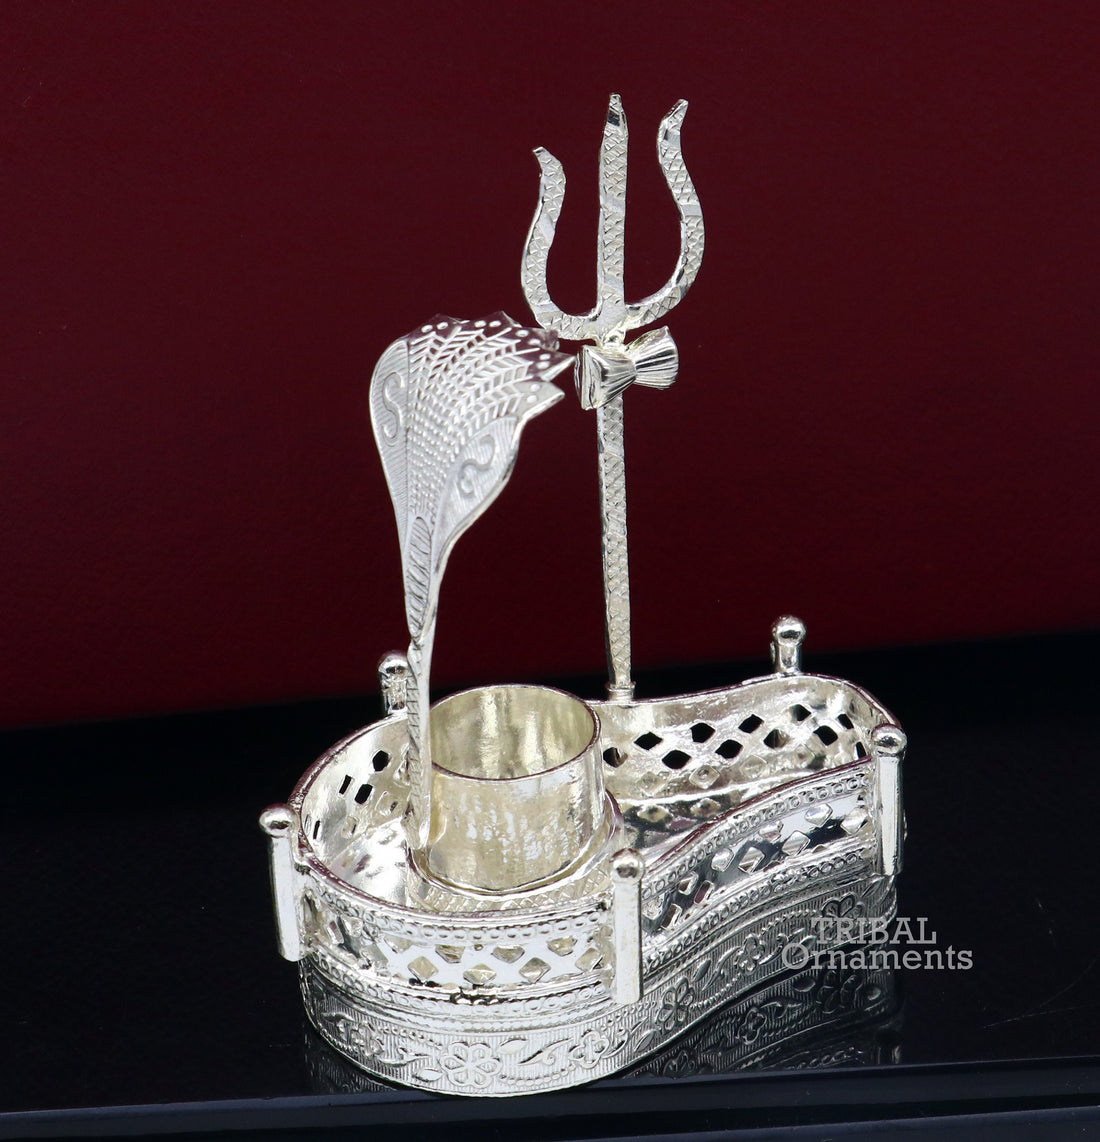 925 sterling silver handmade lord shiva lingam stand/ jalheri with panchmukhi snake (5 face snake) and trident mahakal lingam stand su790 - TRIBAL ORNAMENTS